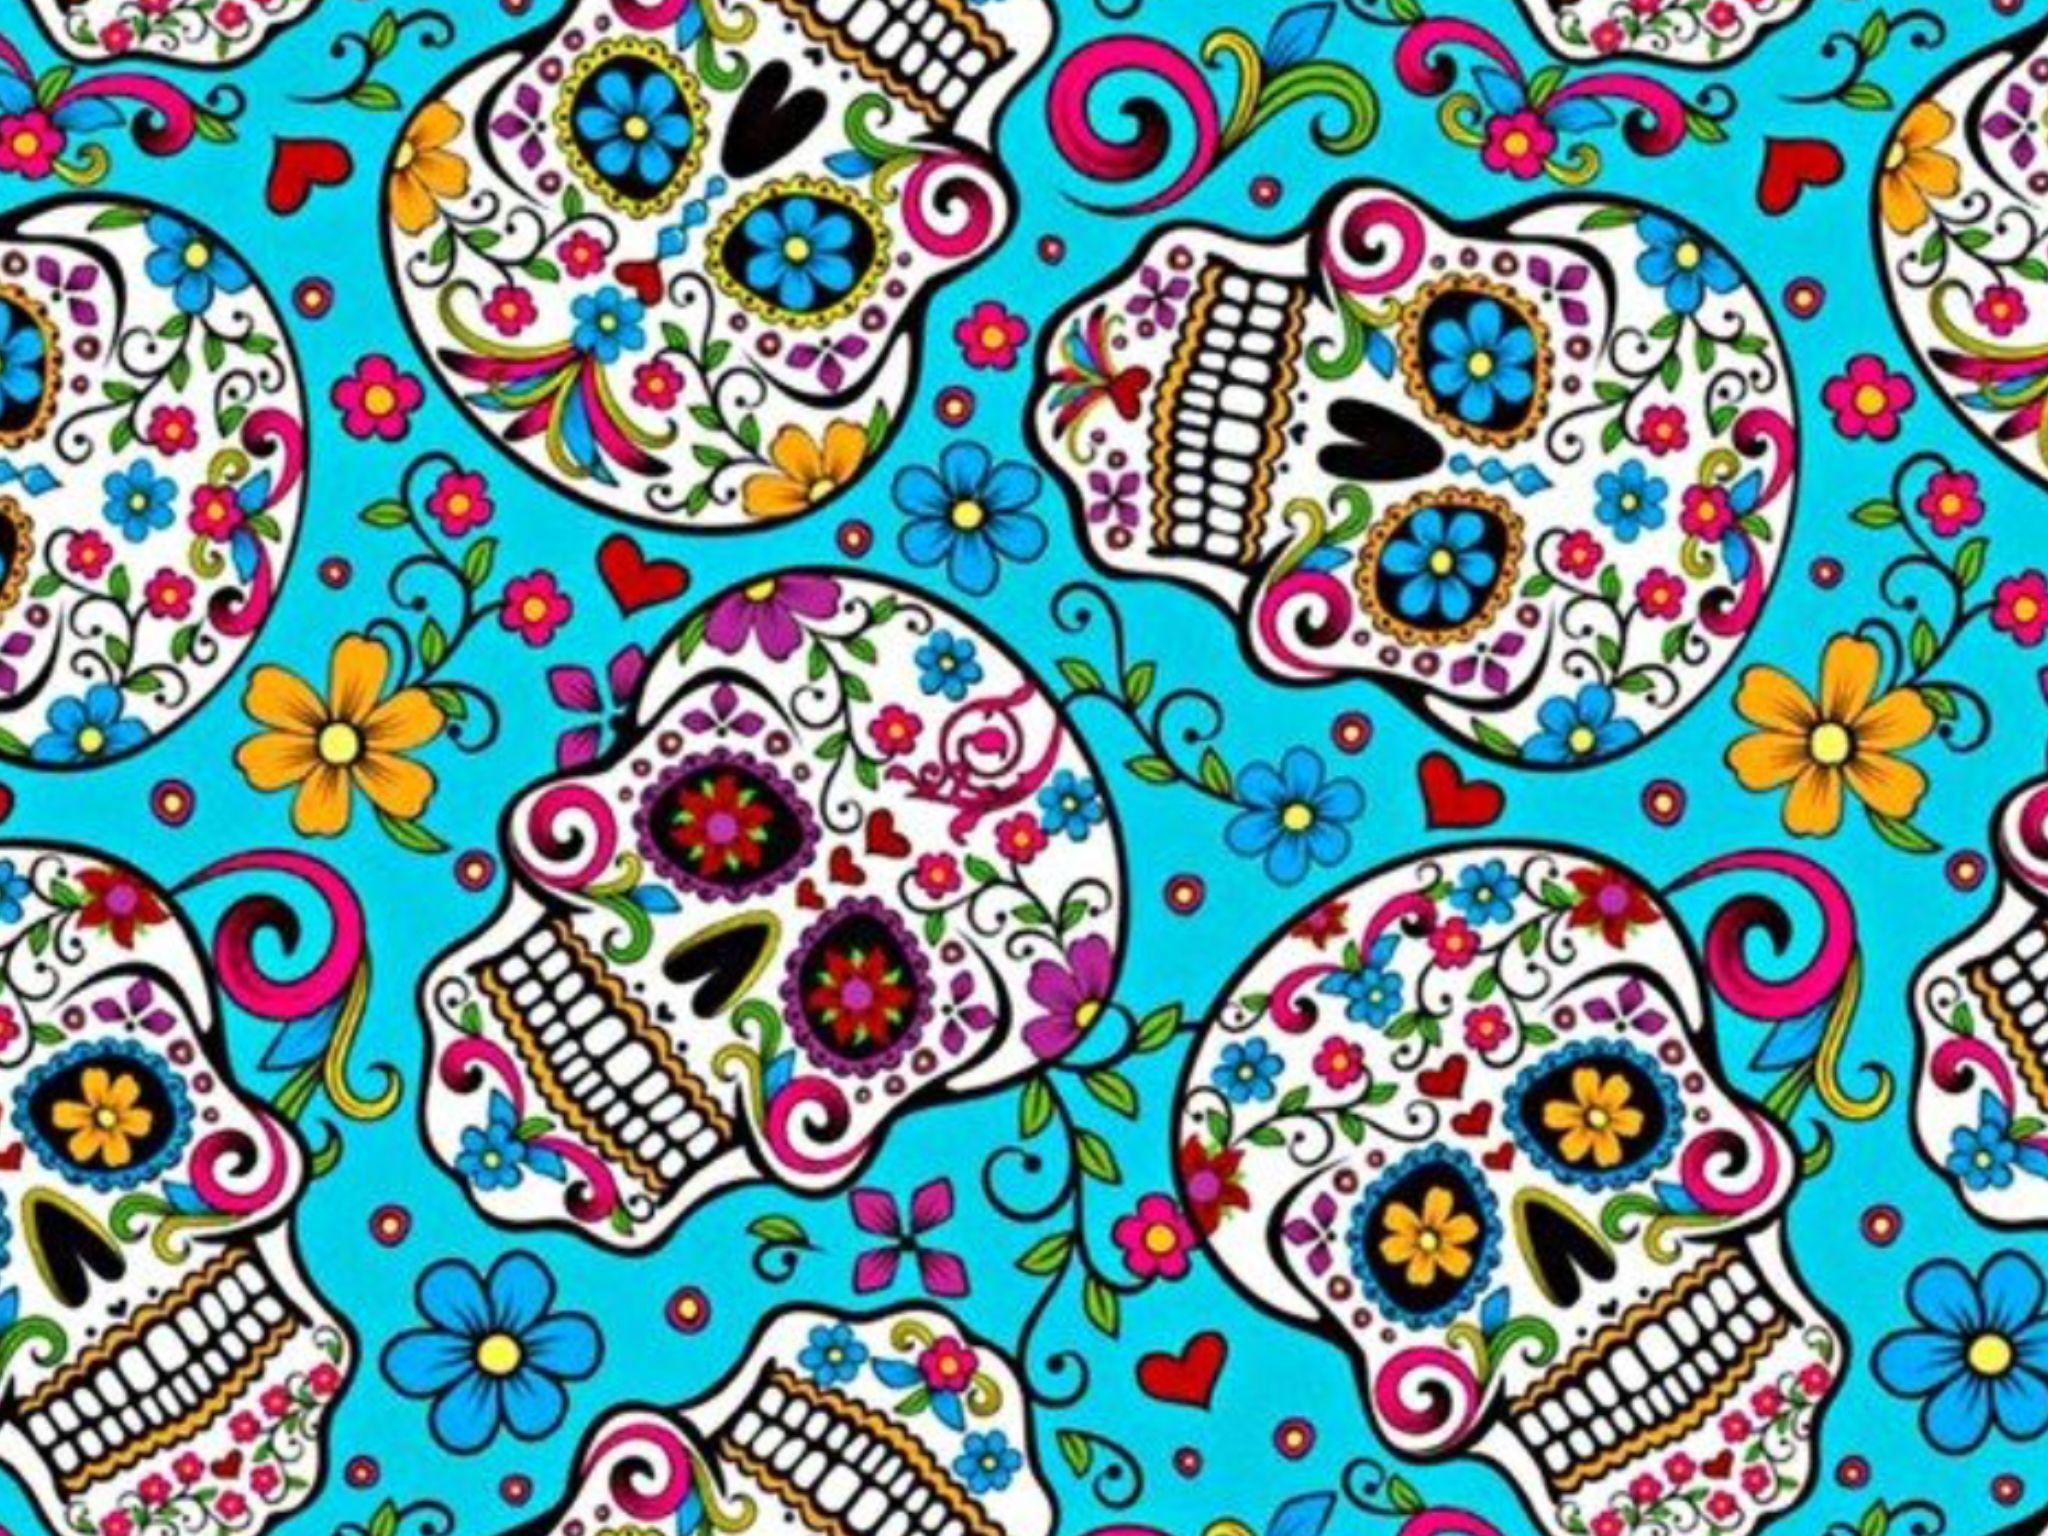 Hipster Skulls Galaxy made by me purple sparkly wallpapers backgrounds  sparkles glittery galaxy  Skull wallpaper Sugar skull wallpaper Skull  art drawing